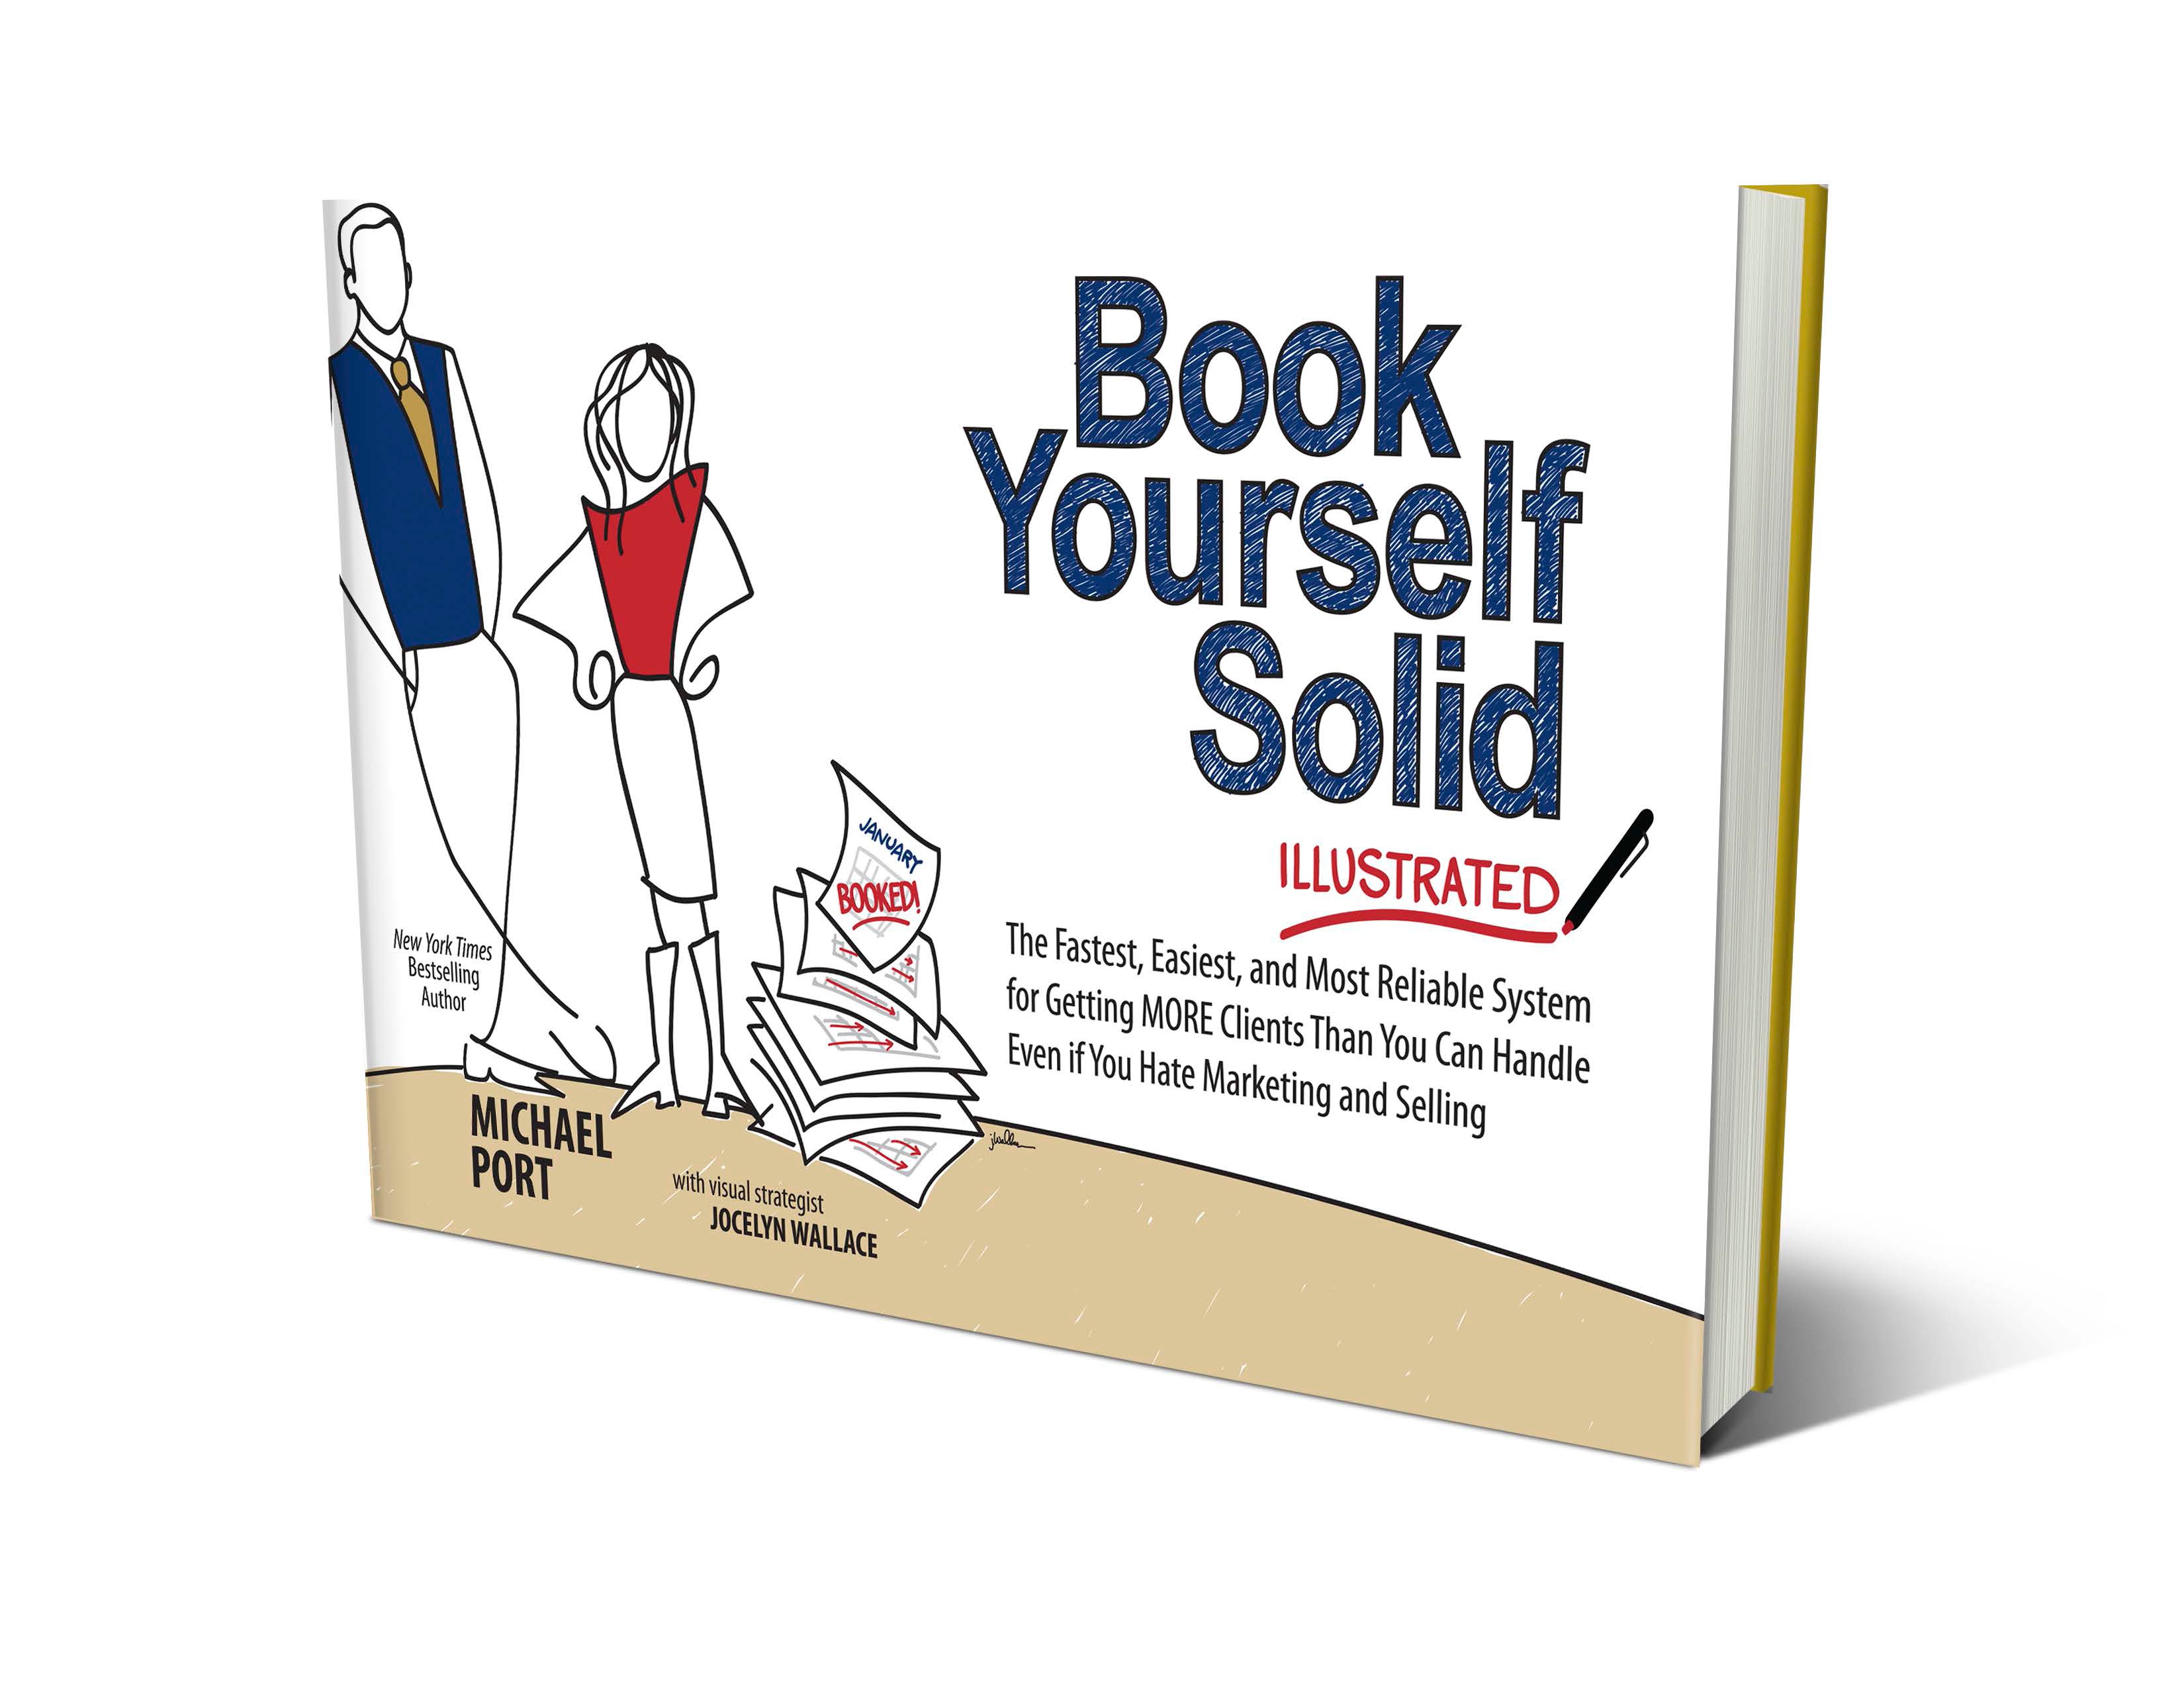 book yourself solid illustrated pdf free download